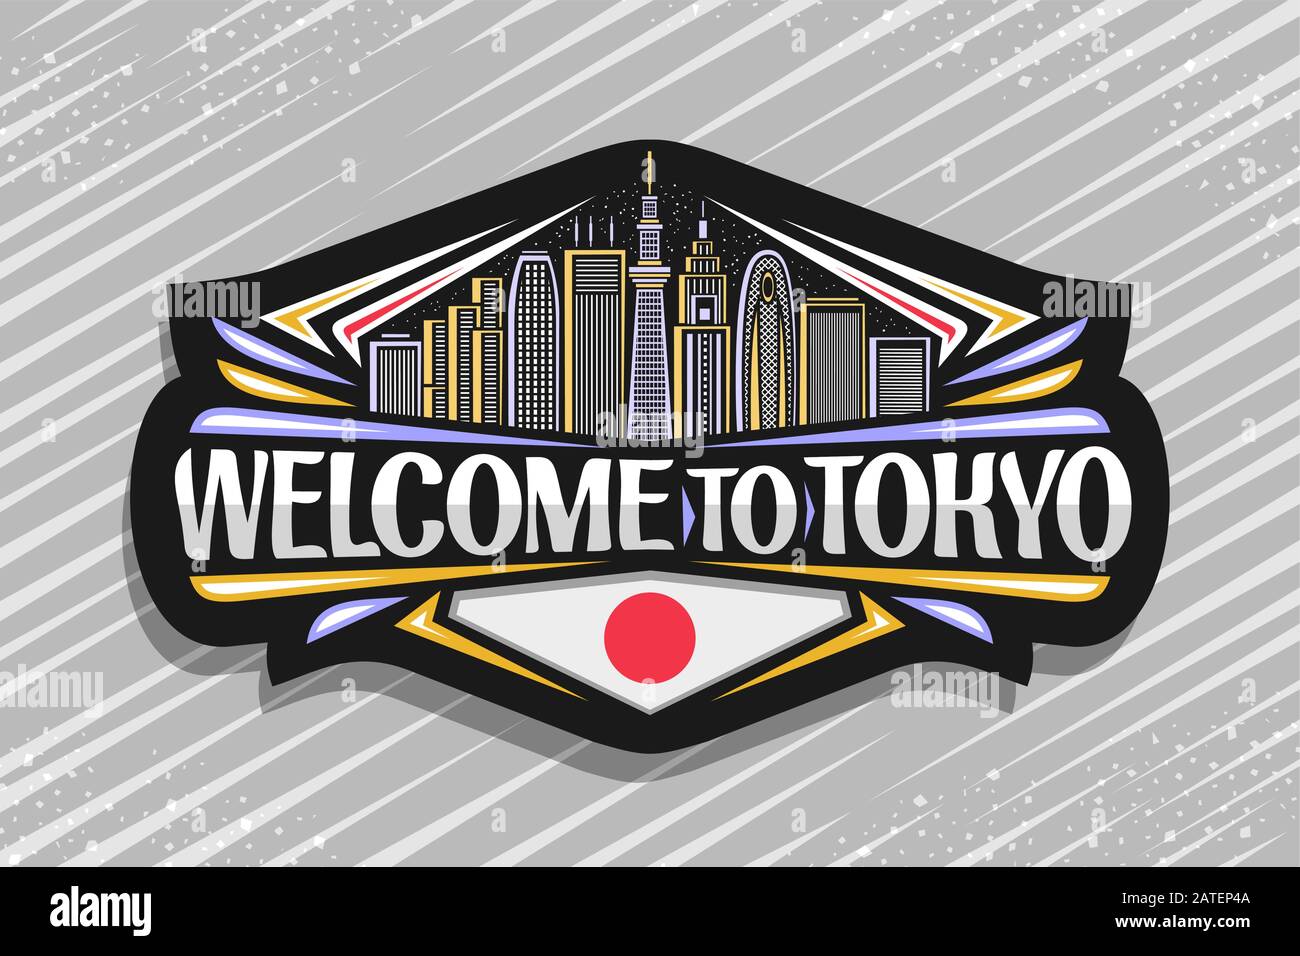 Vector logo for Tokyo, dark decorative signage with draw illustration of modern tokyo cityscape on evening sky background, tourist fridge magnet with Stock Vector